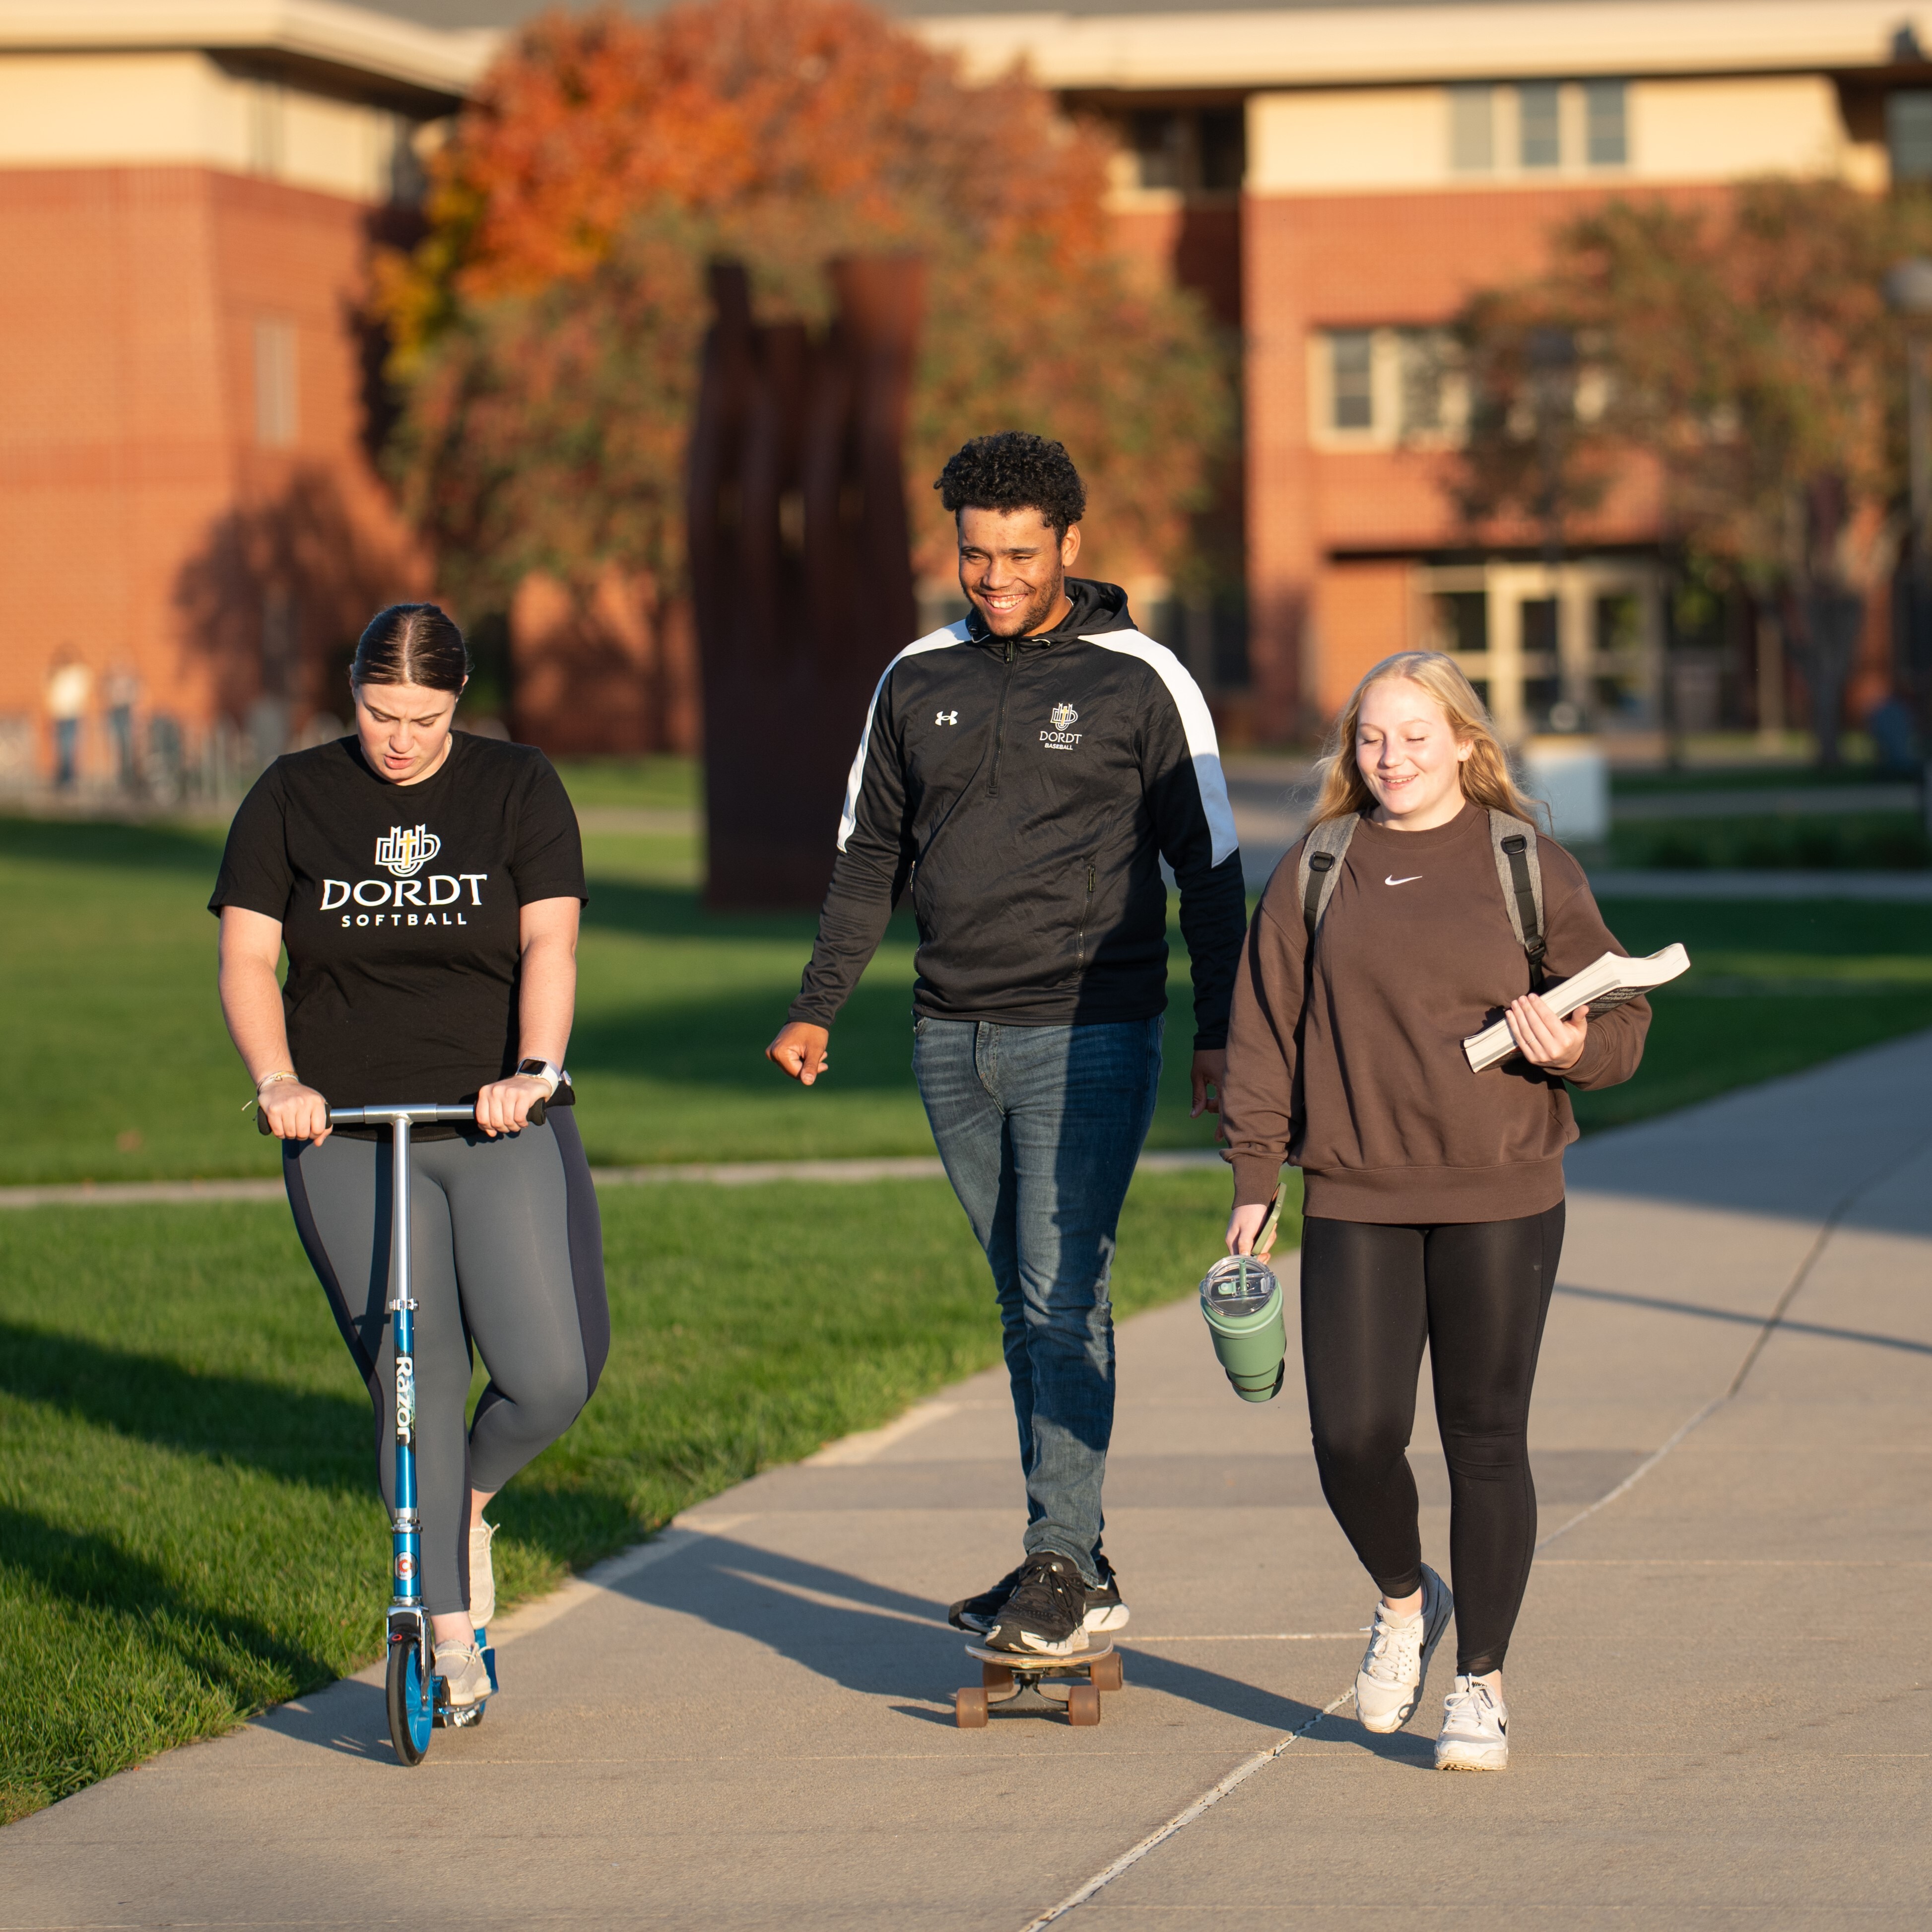 Group of students walking together